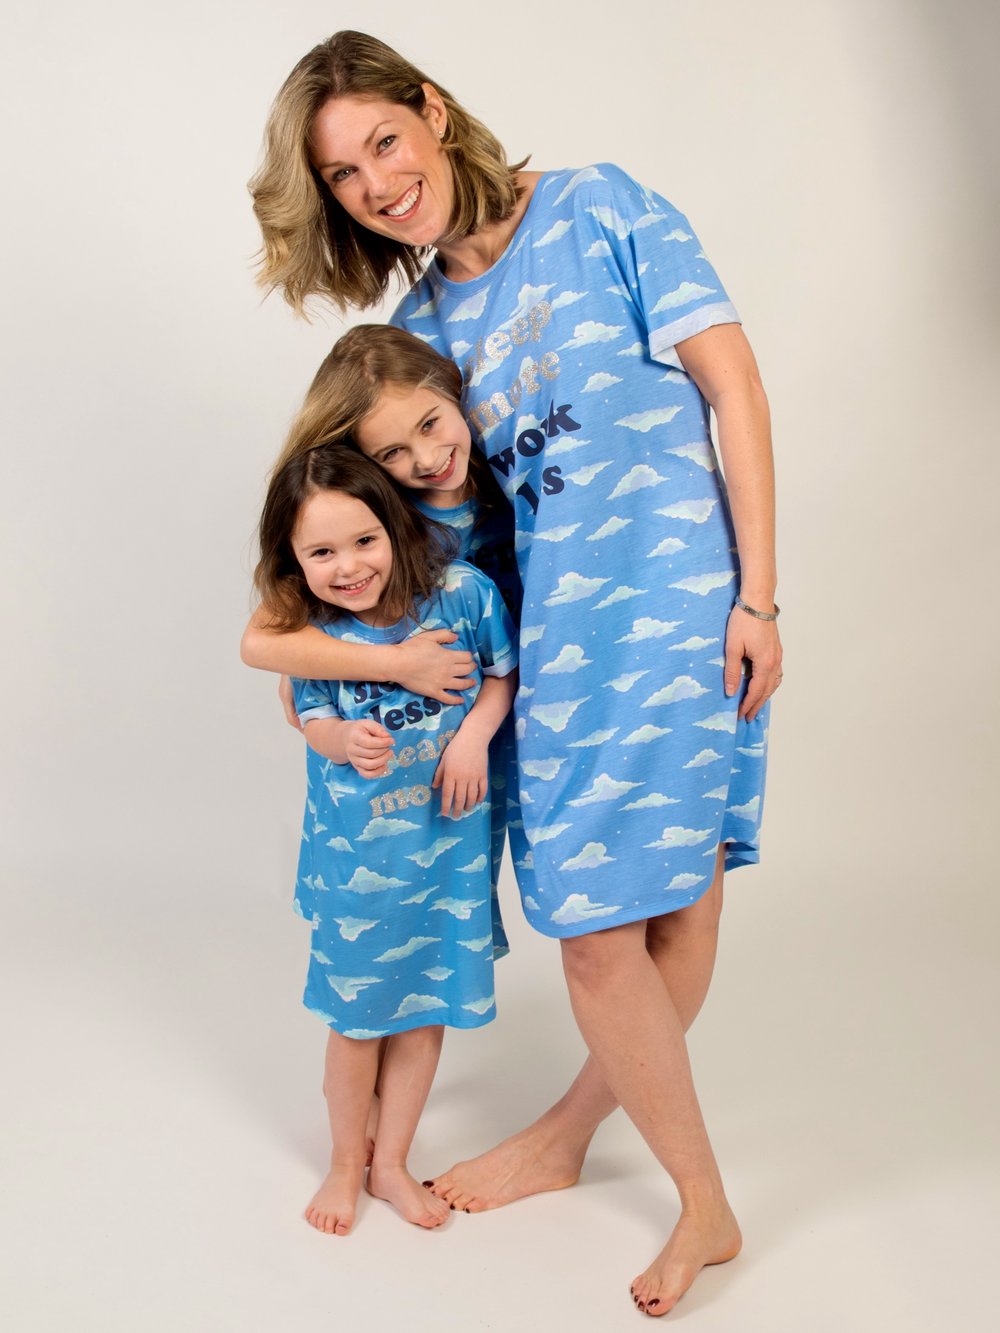 chuck ehrsam recommends mom and son pajamas pic